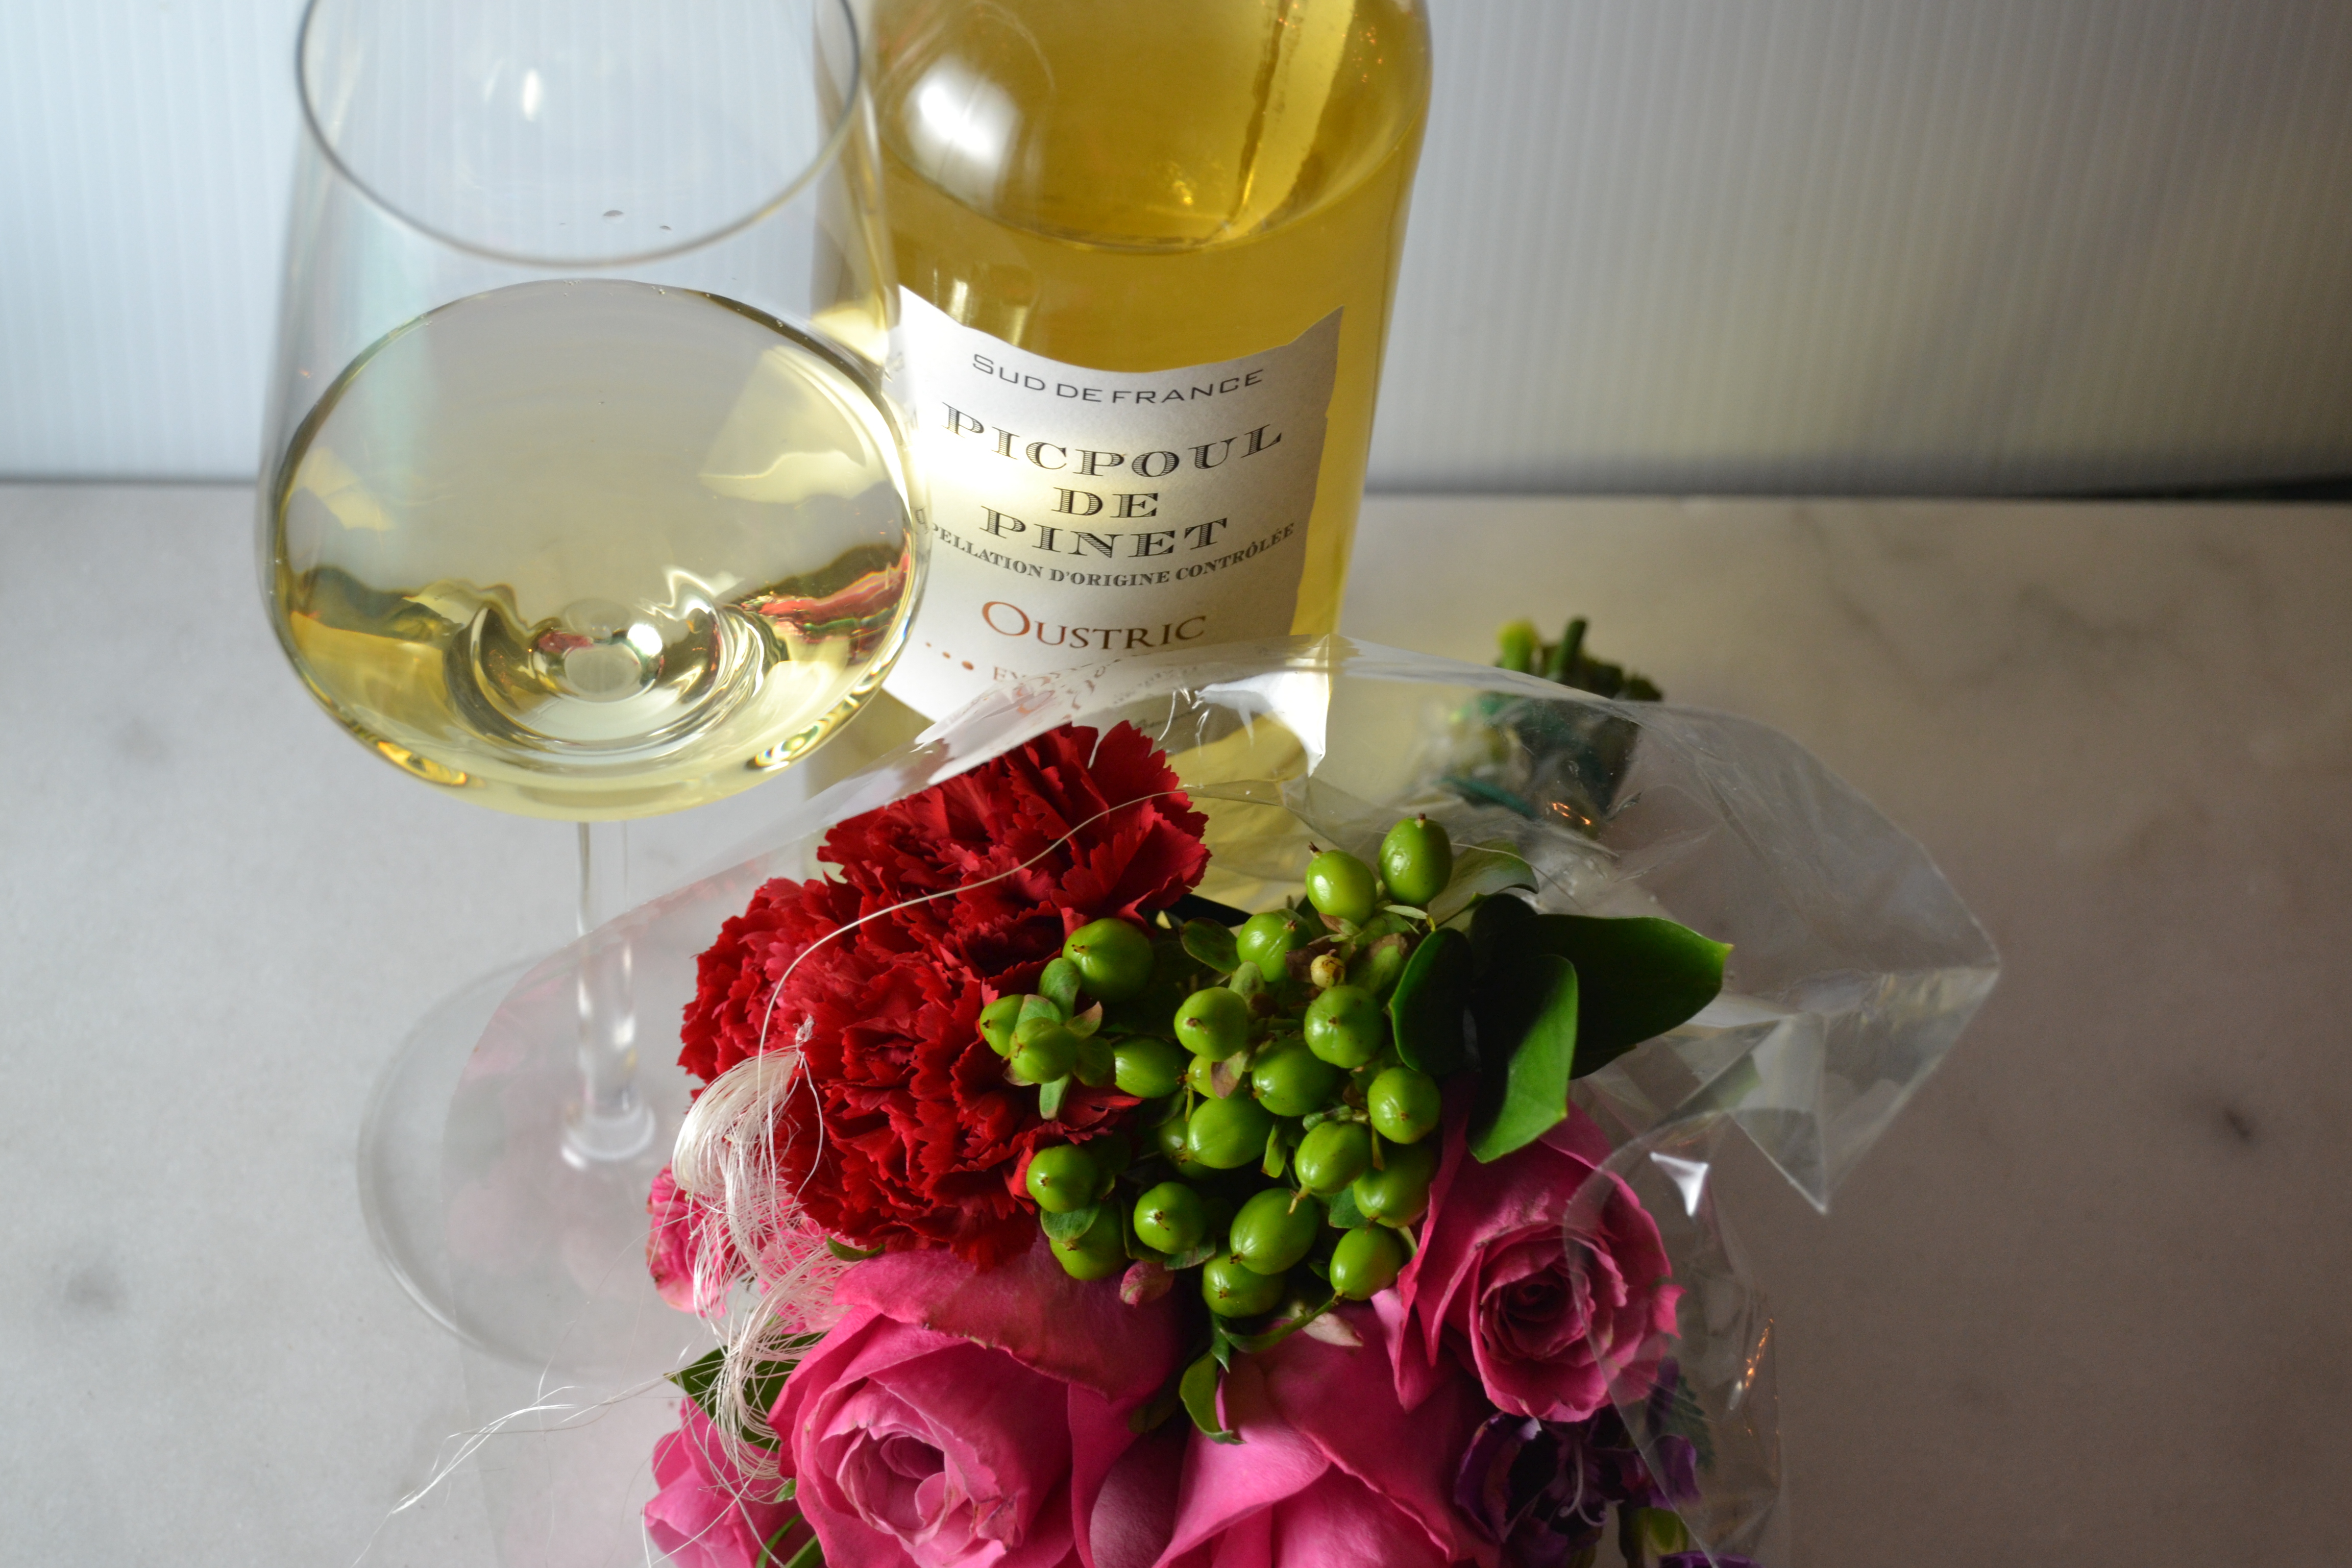 #WinePW – Valentine’s Day Steakhouse Dinner at Home